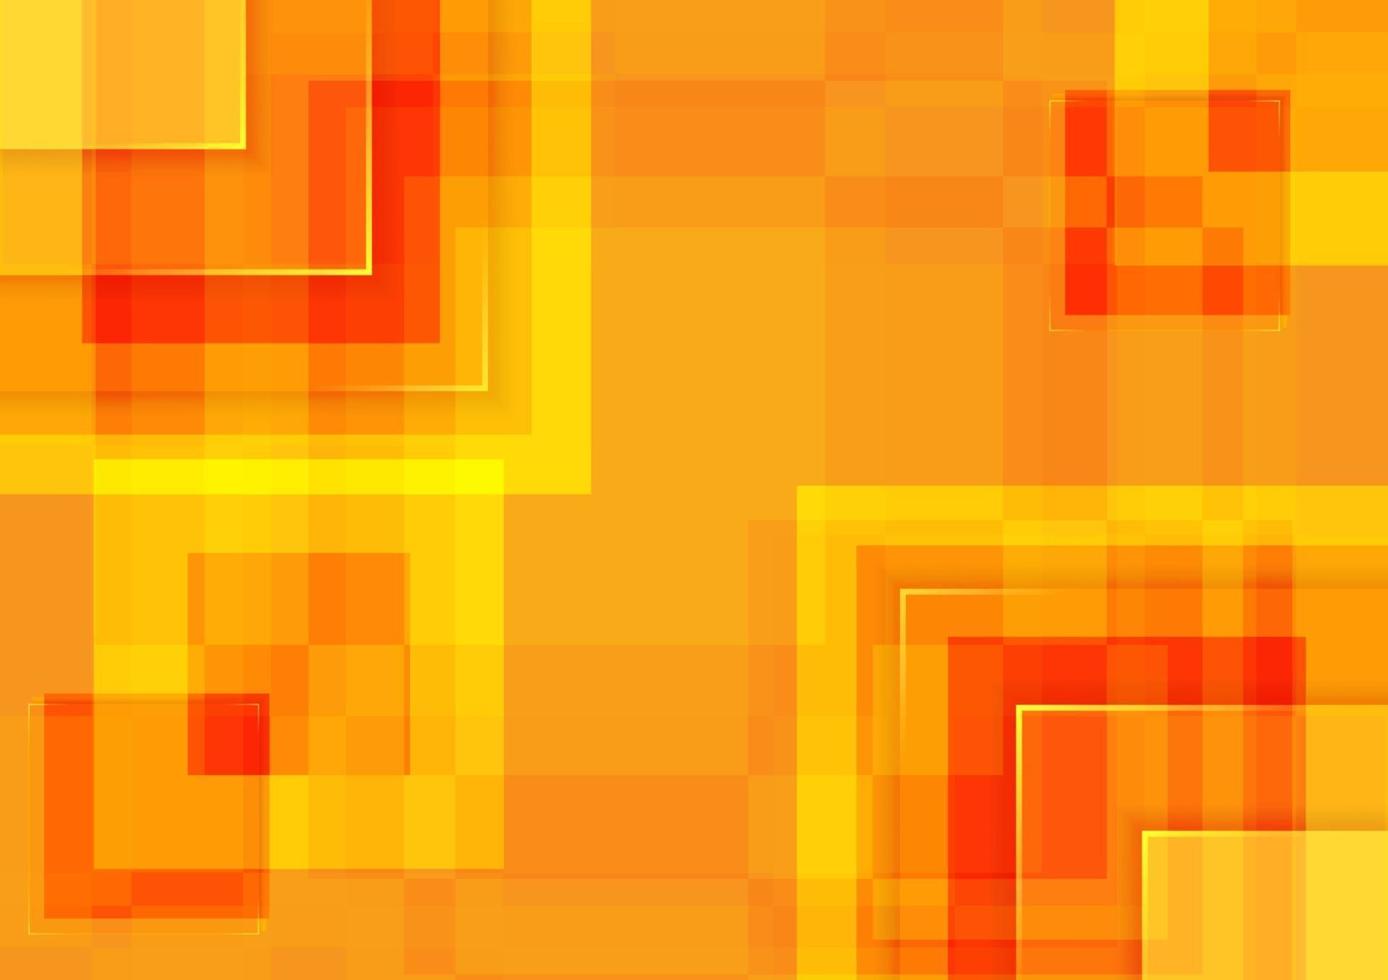 Abstract background. Orange pattern square shapes design vector